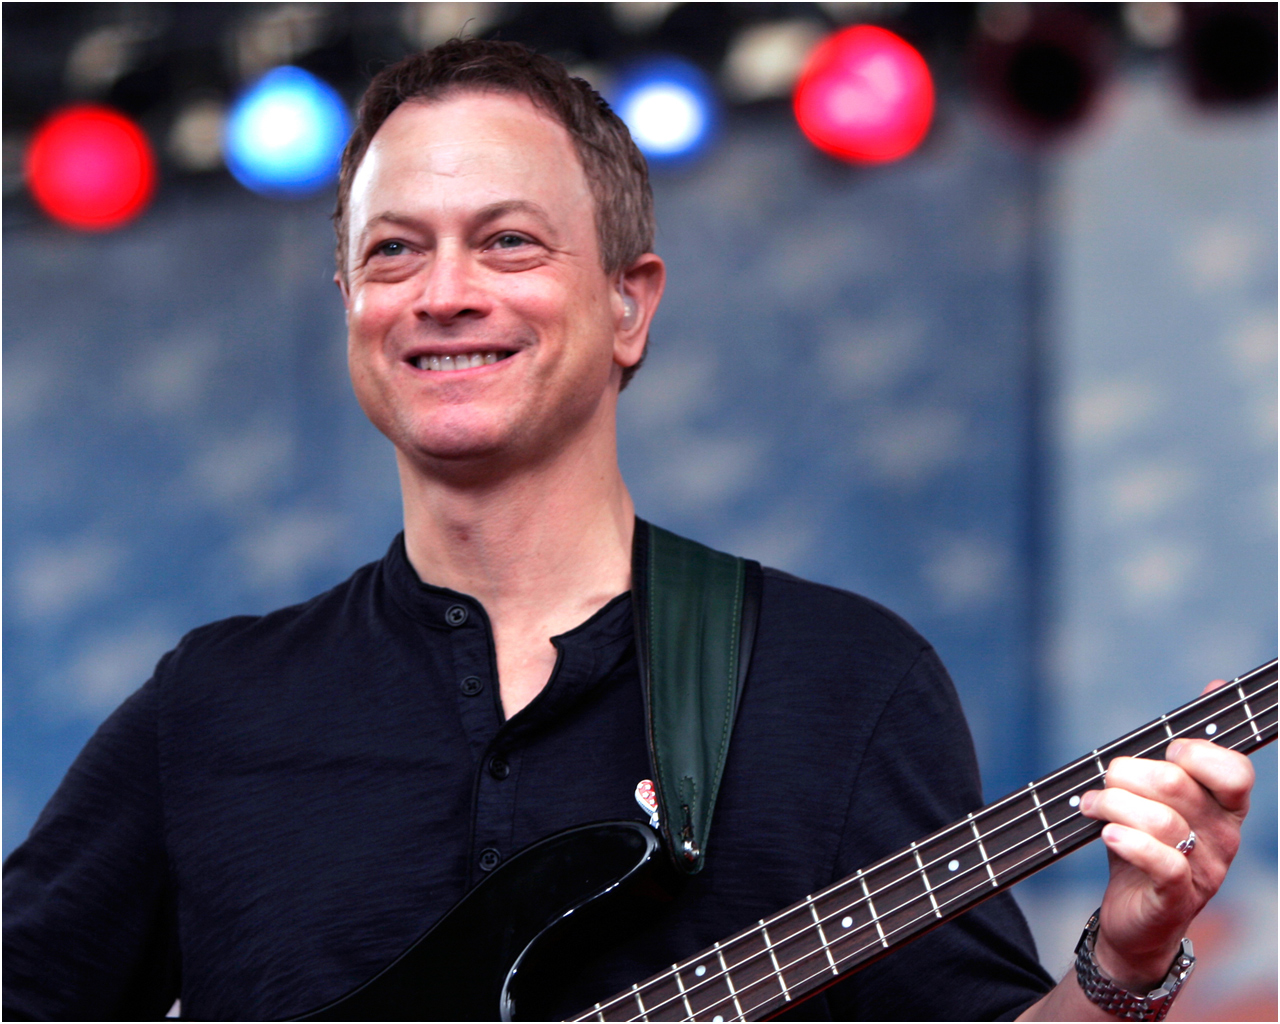 Mod The Sims - Gary Sinise - Mac Taylor, Lt. Dan, and more - 5 versions!